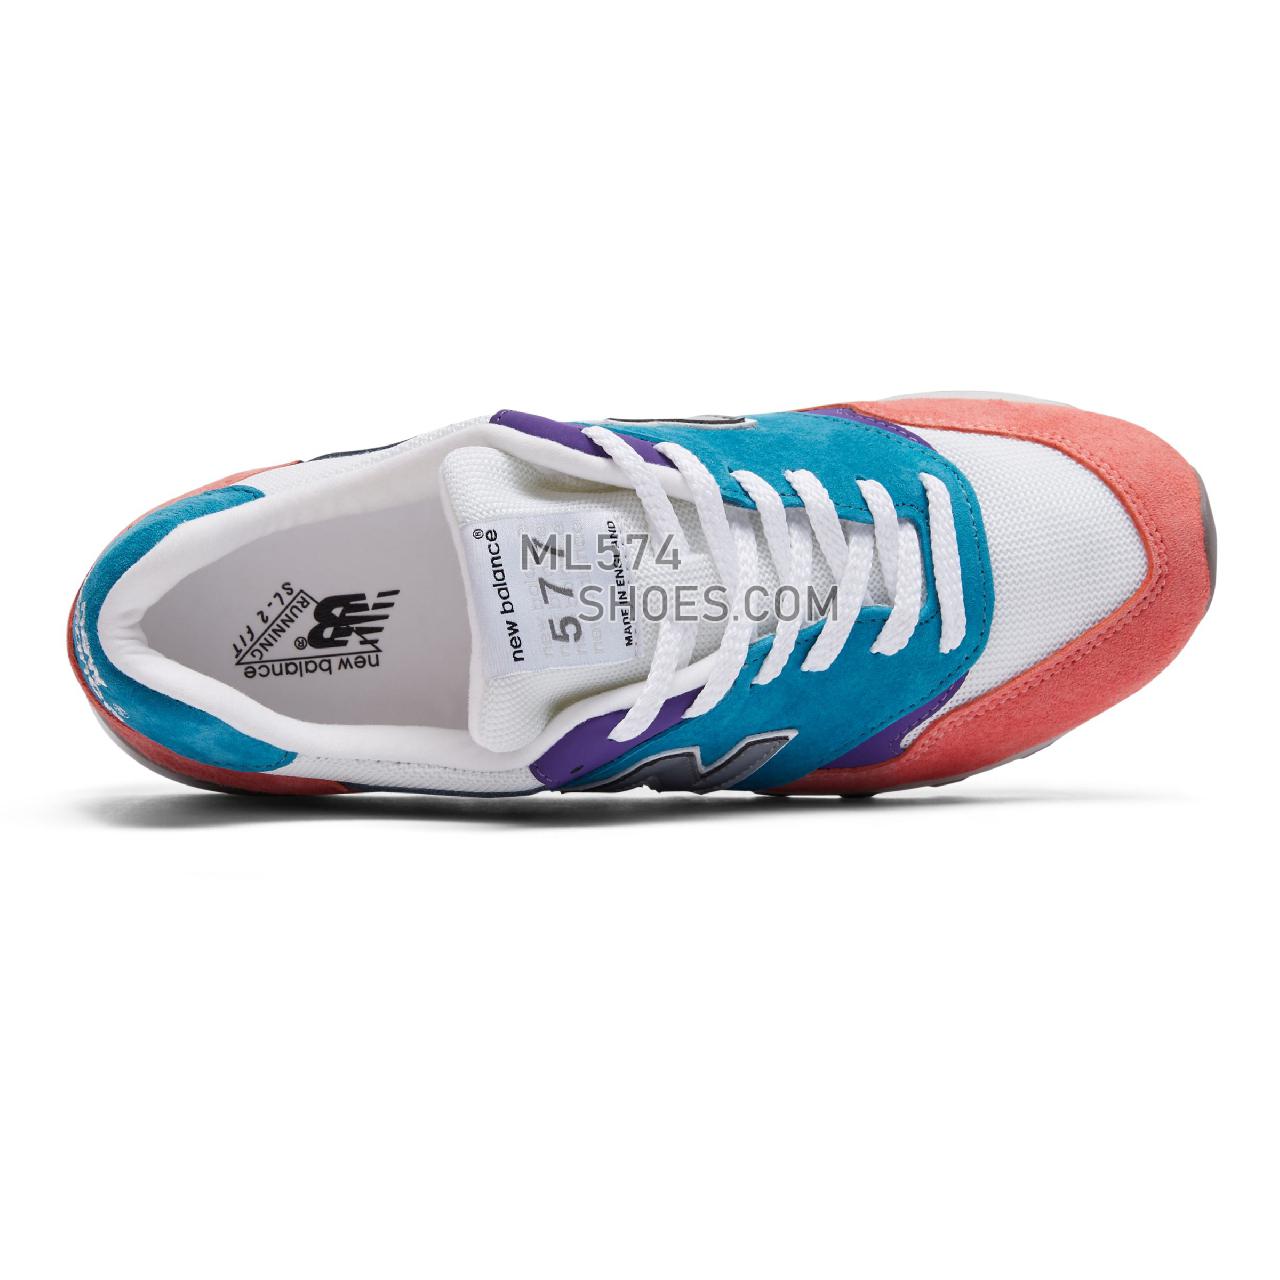 New Balance MADE in UK 577 - Men's Made in USA And UK Sneakers - Pink with teal and purple - M577GPT